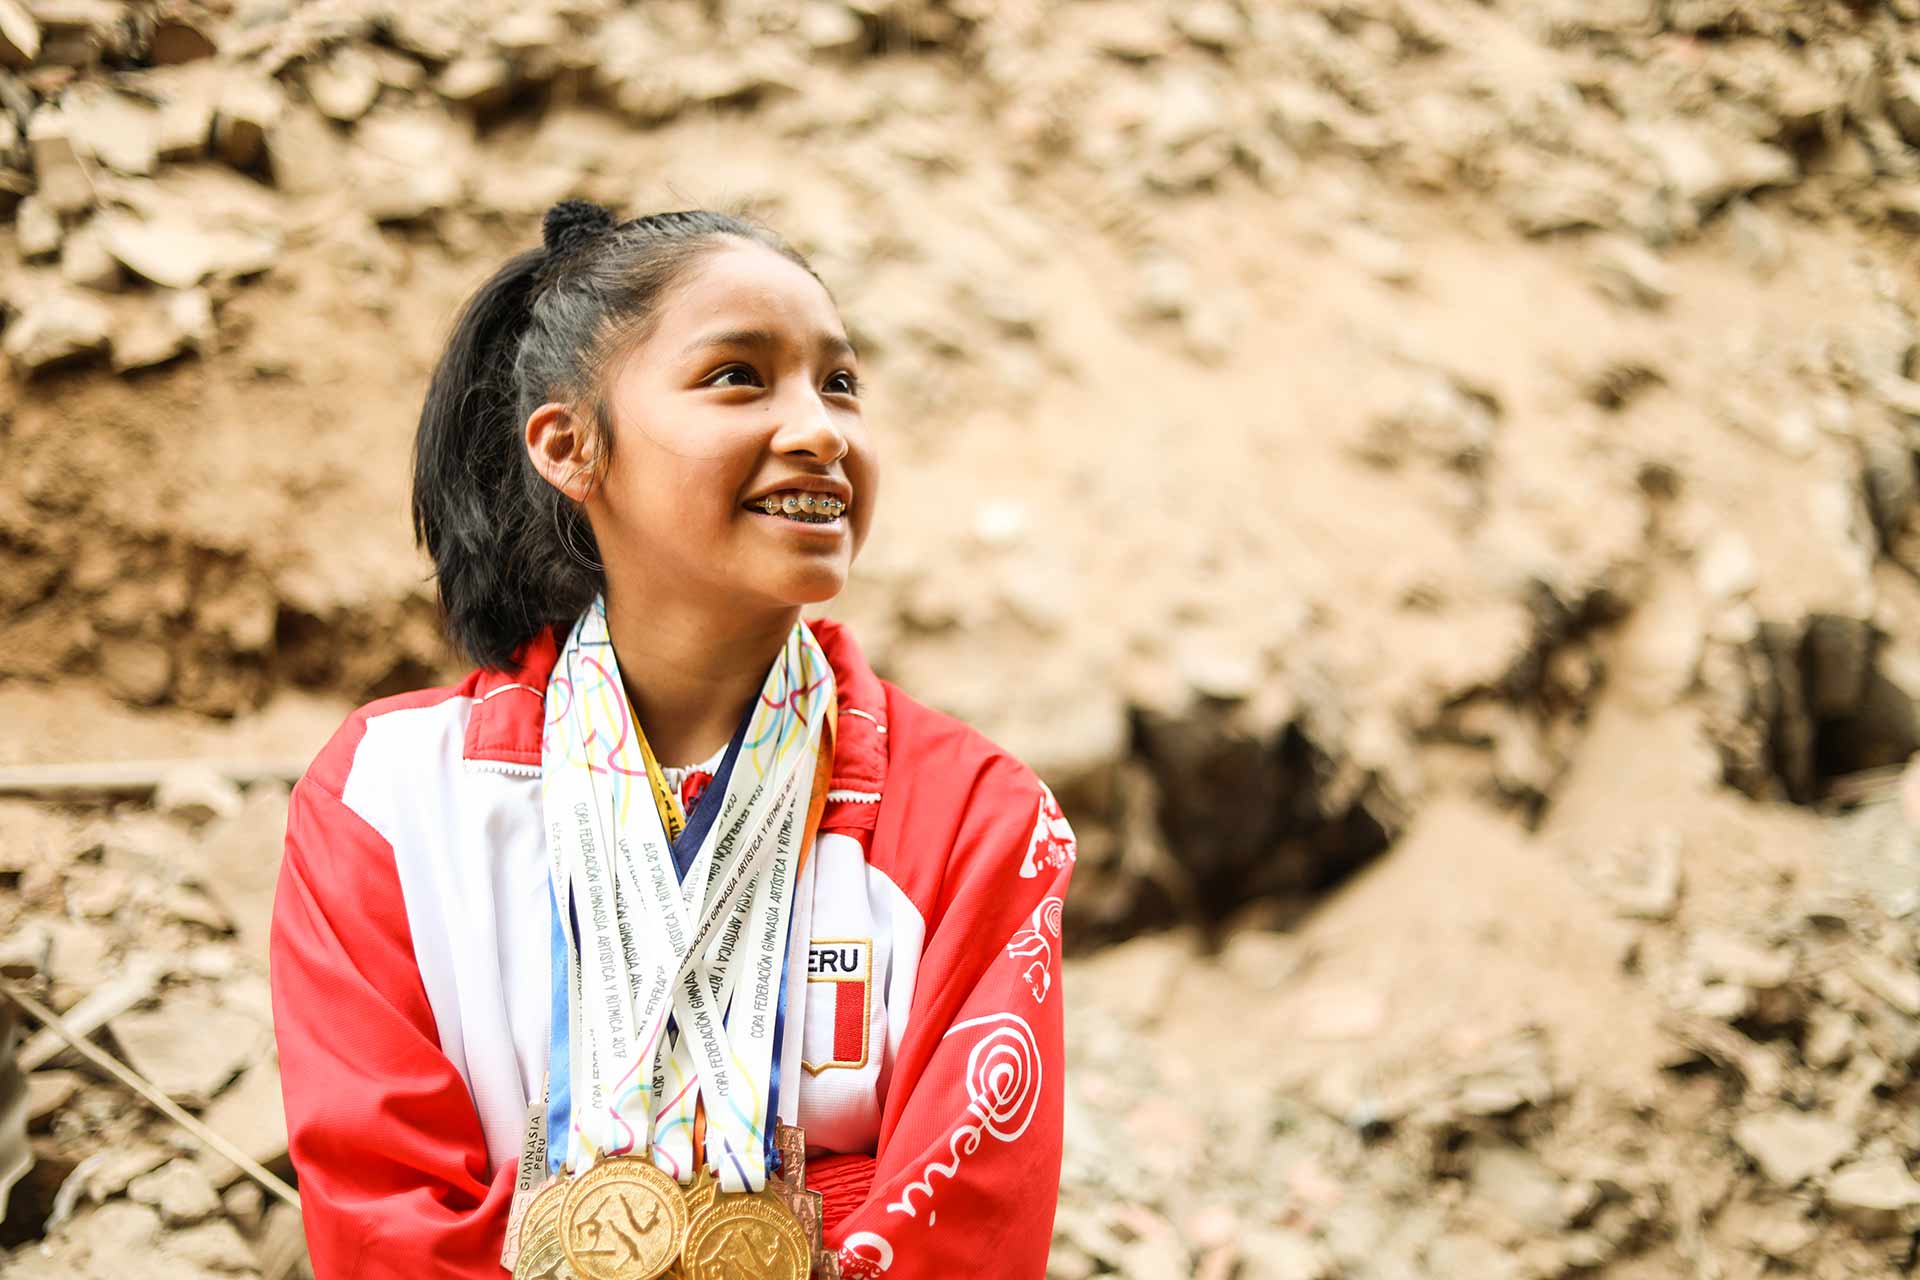 A girl wearing a red and white jacket has multiple gold medals around her neck. She smiles, looking up and to the side.